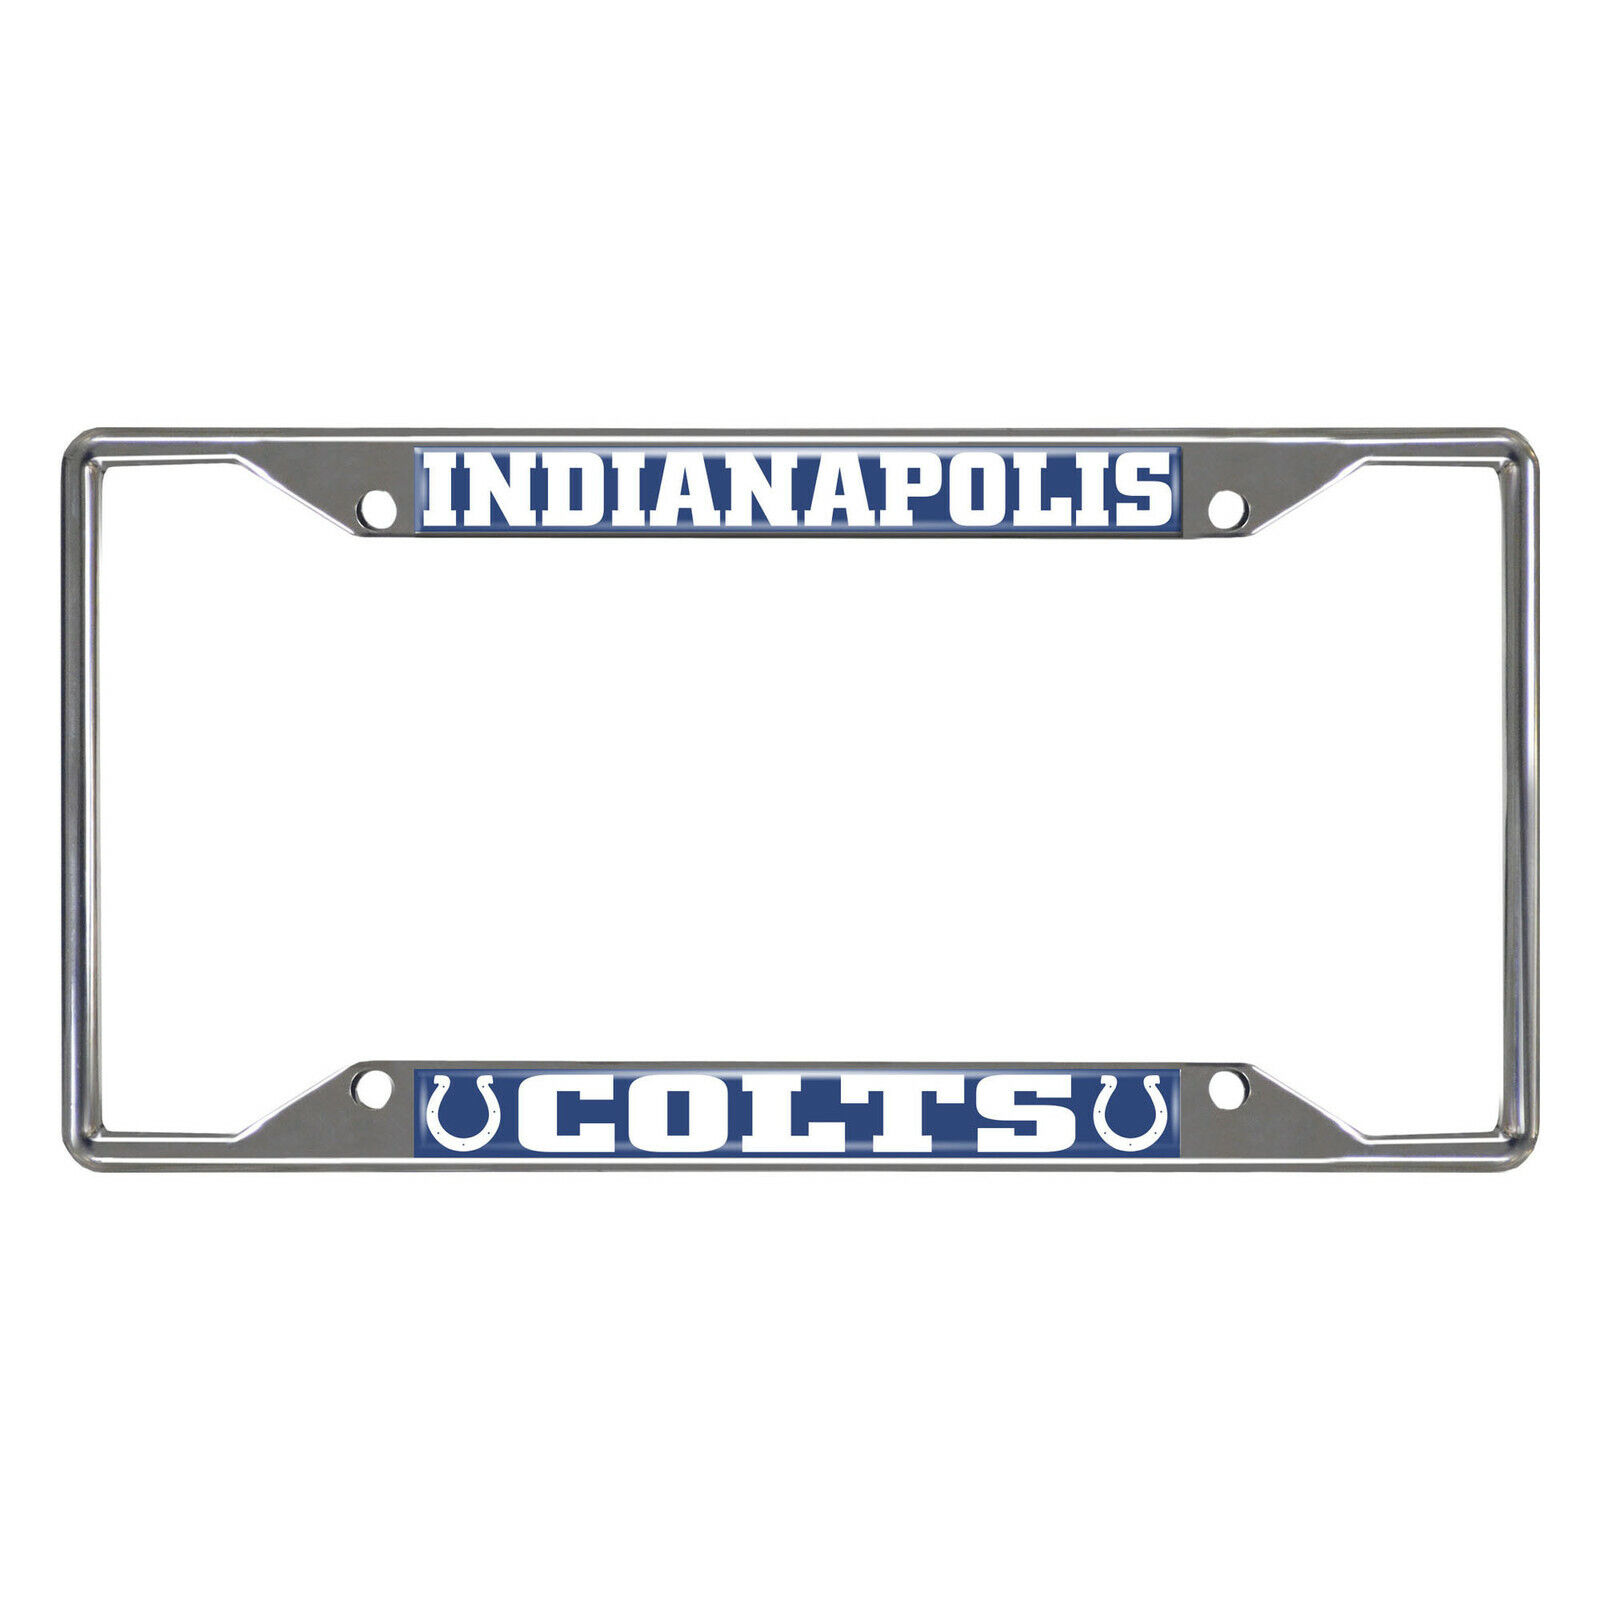 New NFL Indianapolis Colts Car Truck Chrome Metal License Plate Frame